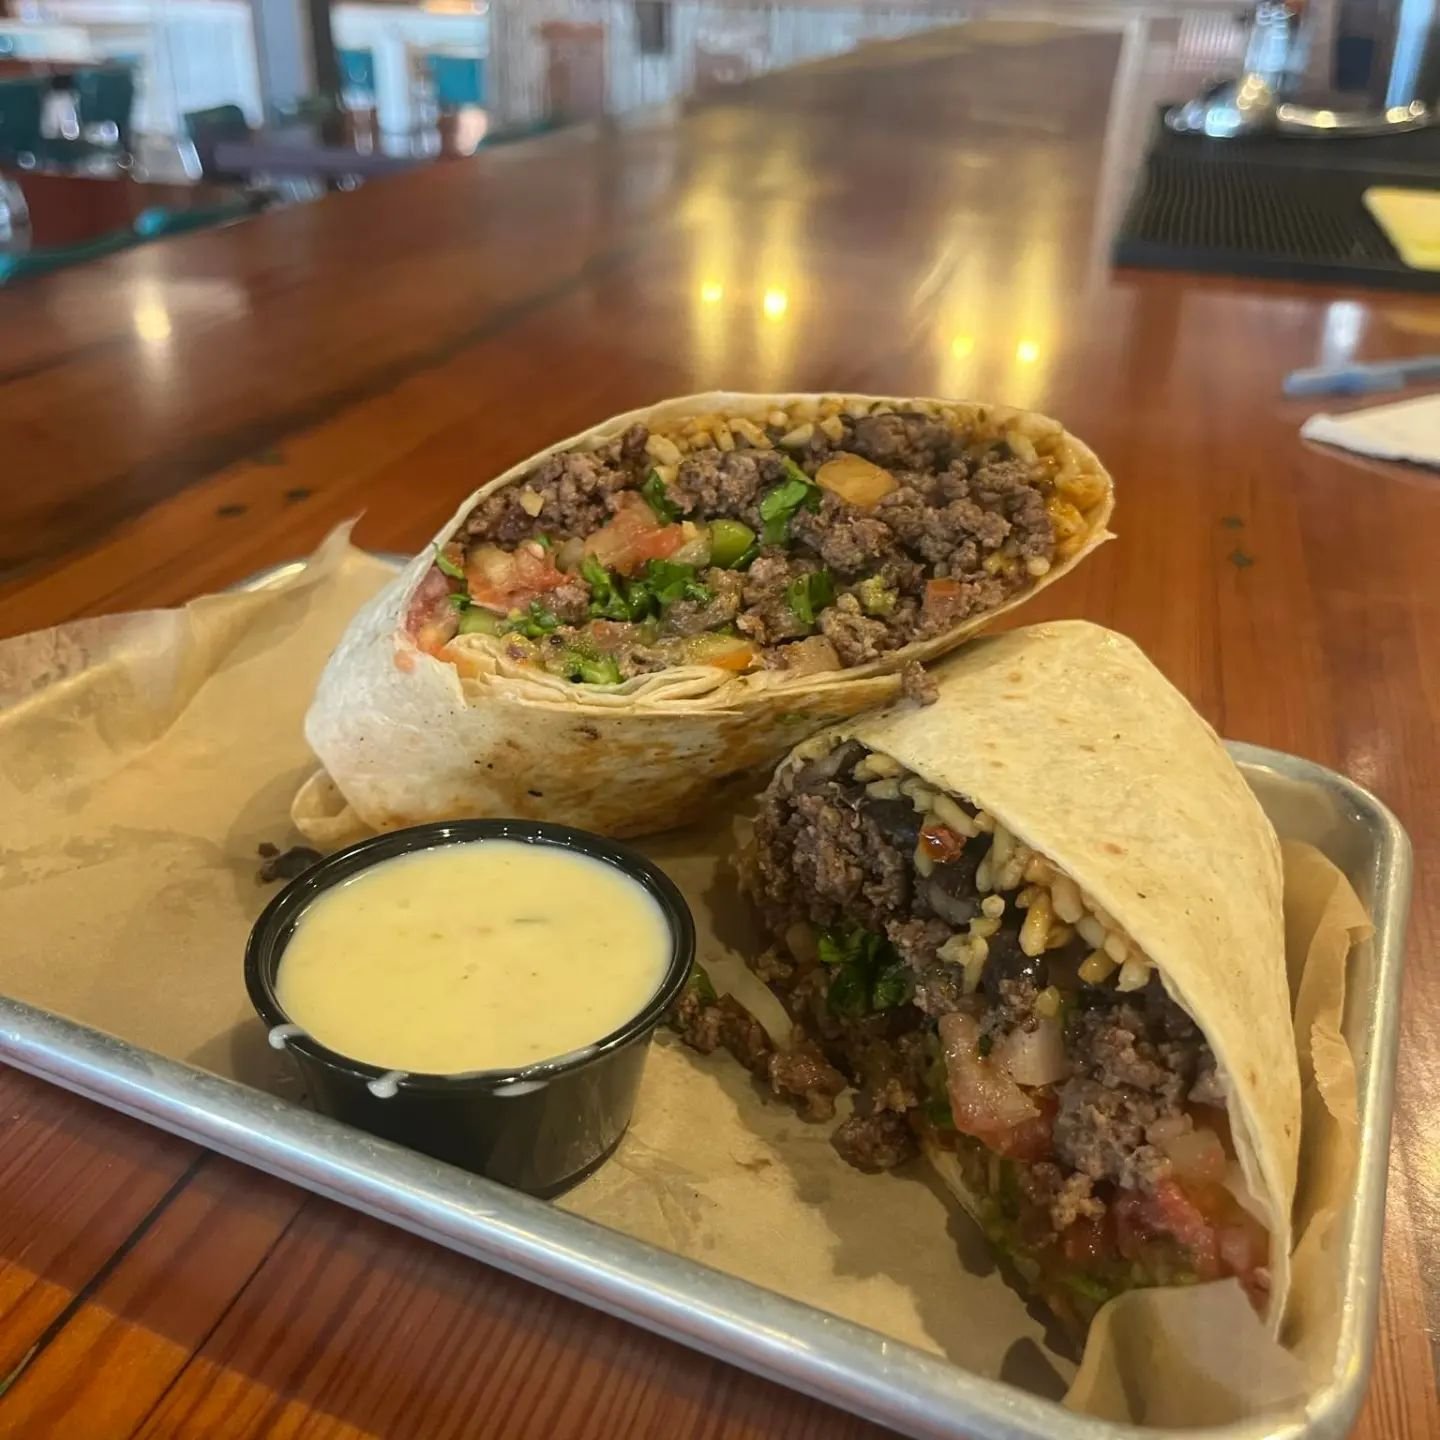 Beef burrito topped with your choice of Spanish rice, black beans, lettuce, tomato, onion, fresh guacamole and salsa all with a side of queso! $6 each